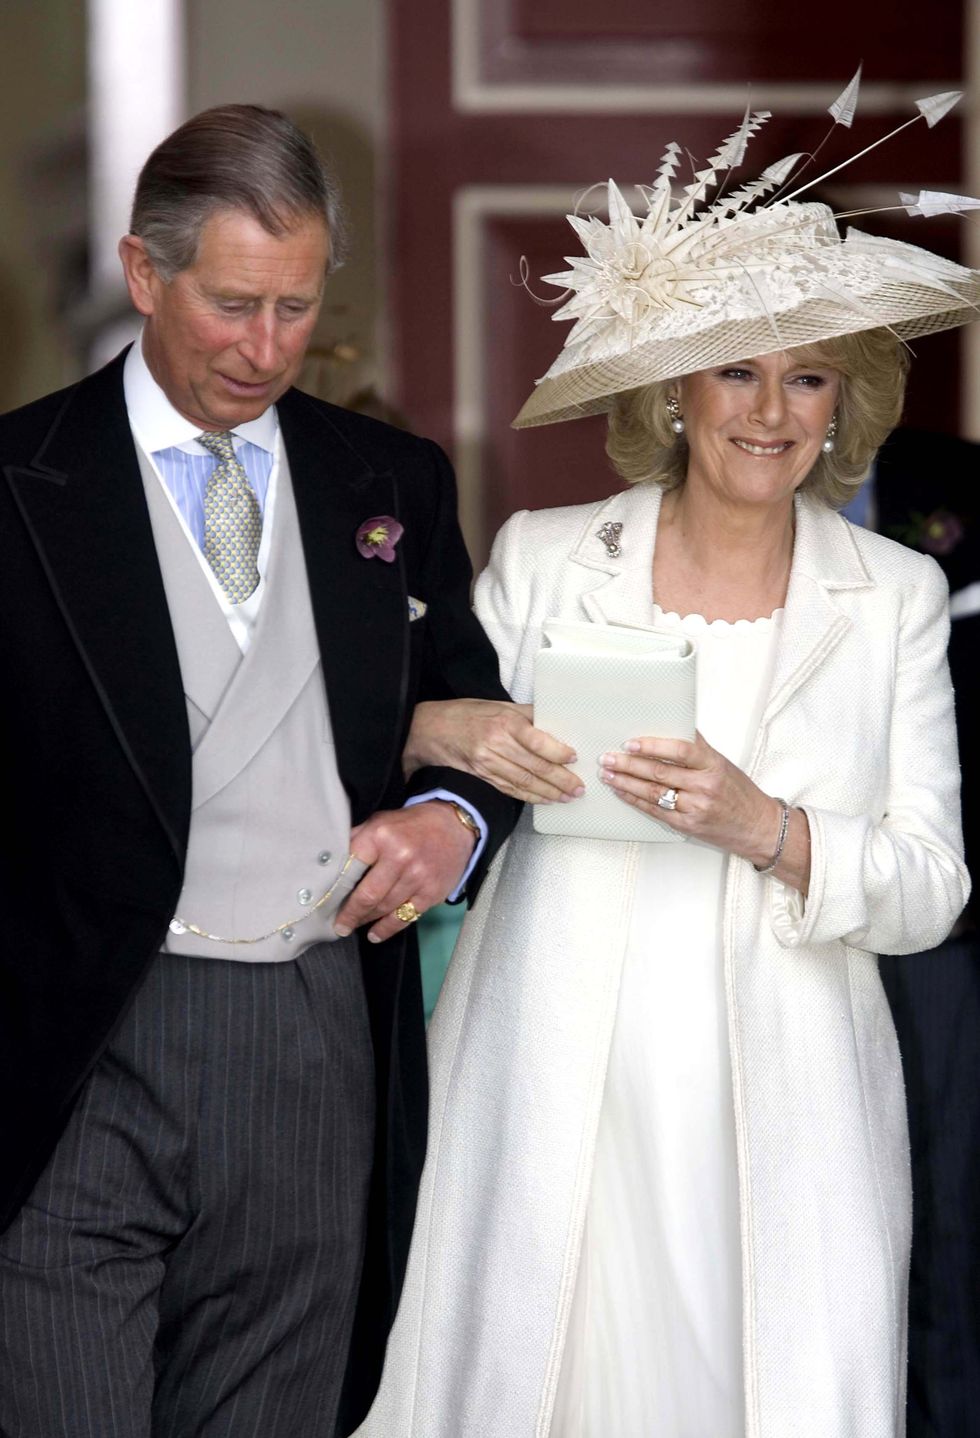 the royal wedding of hrh prince charles and mrs camilla parker bowles